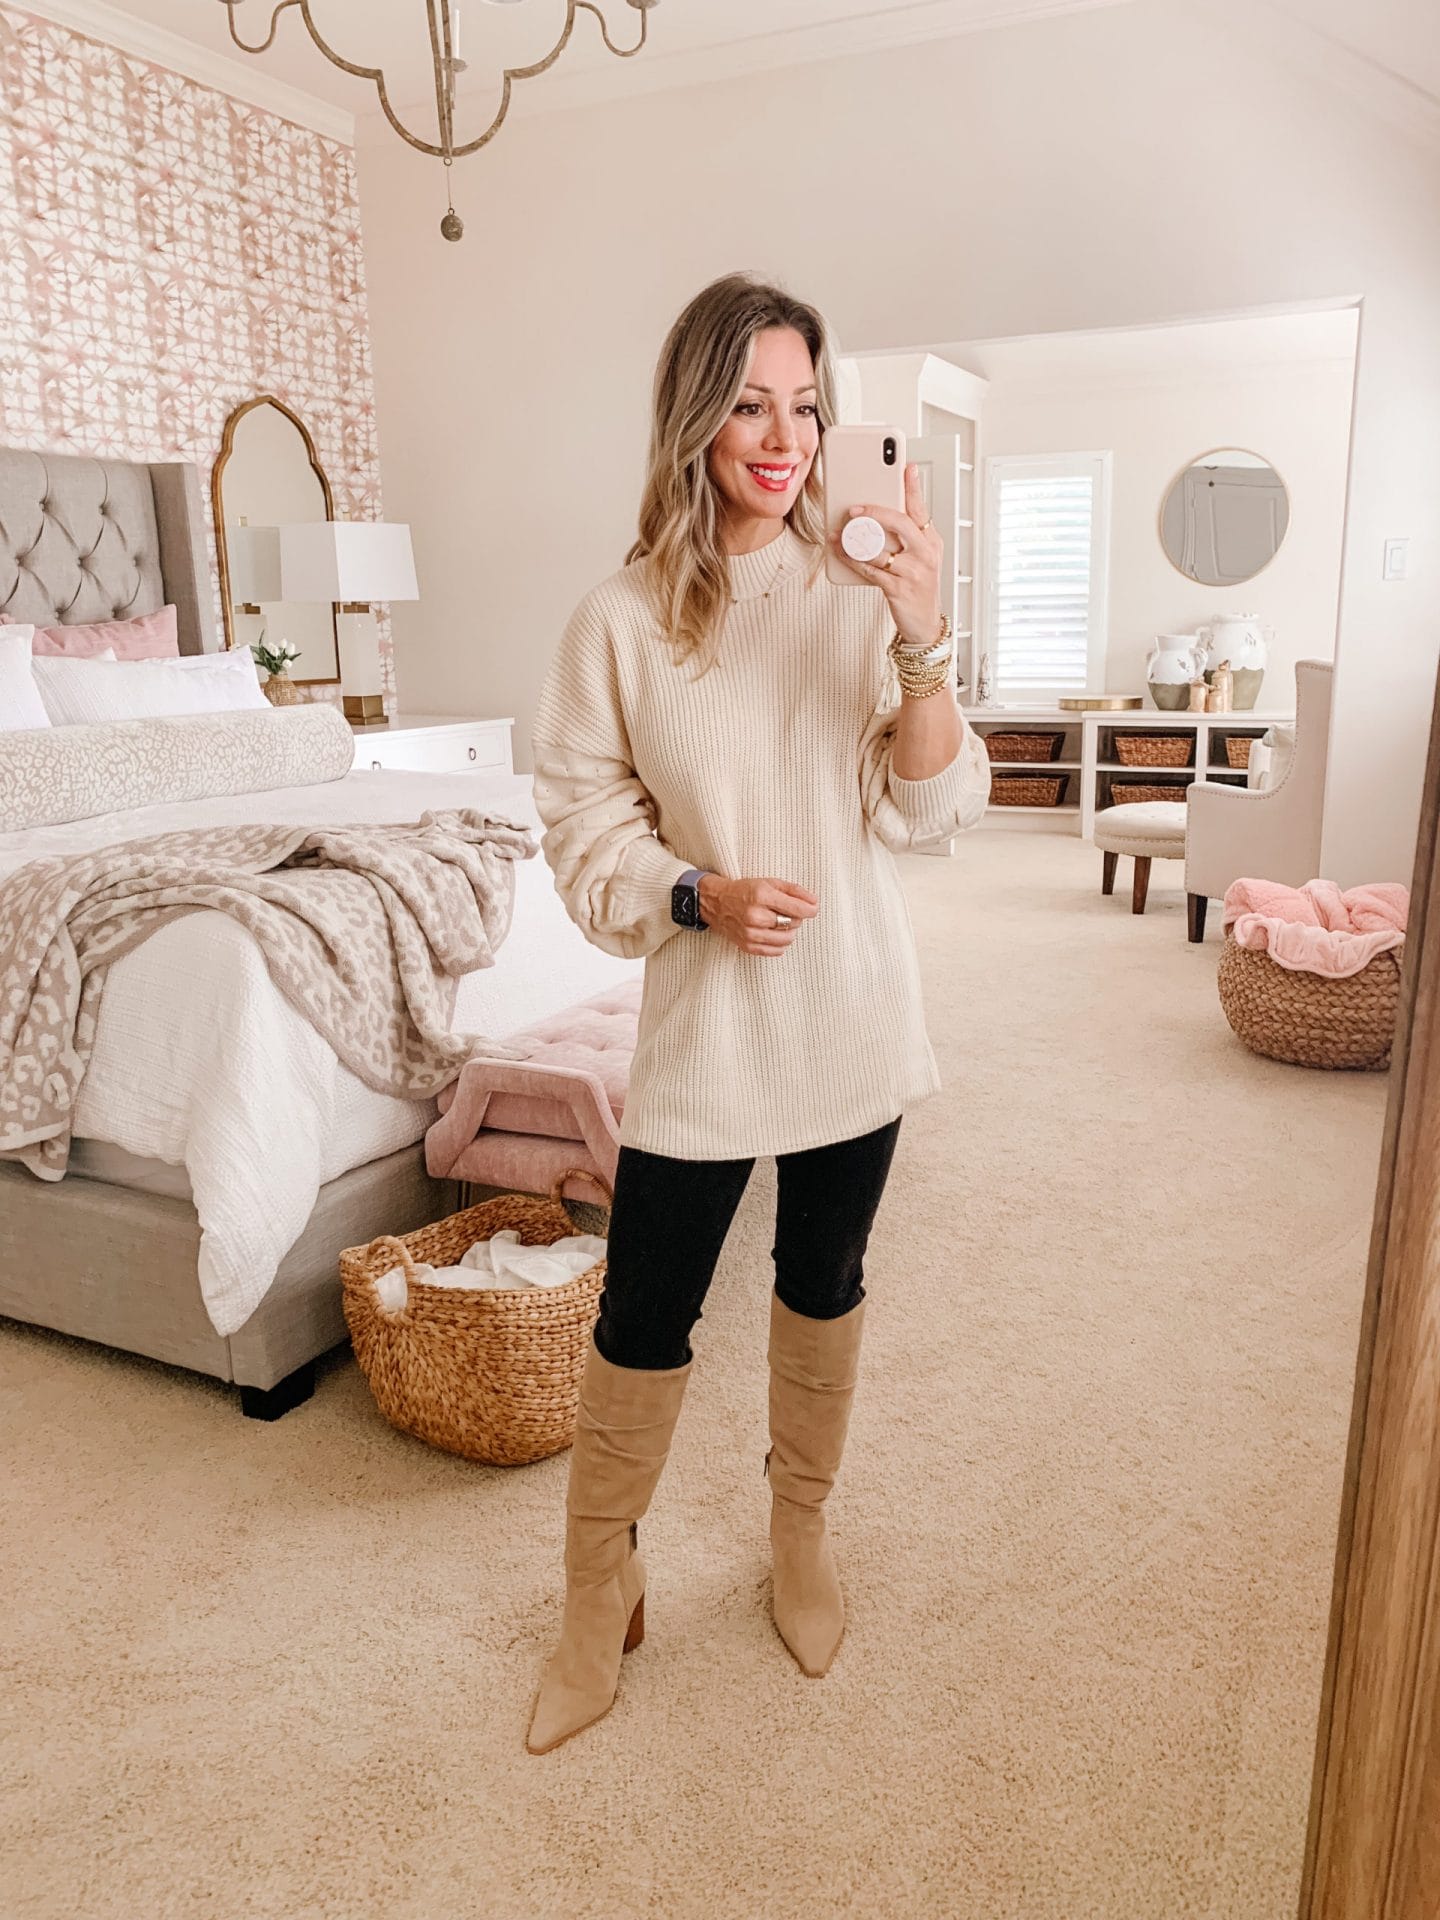 Amazon Fashion Finds, Sweater, Jeans, Boots 